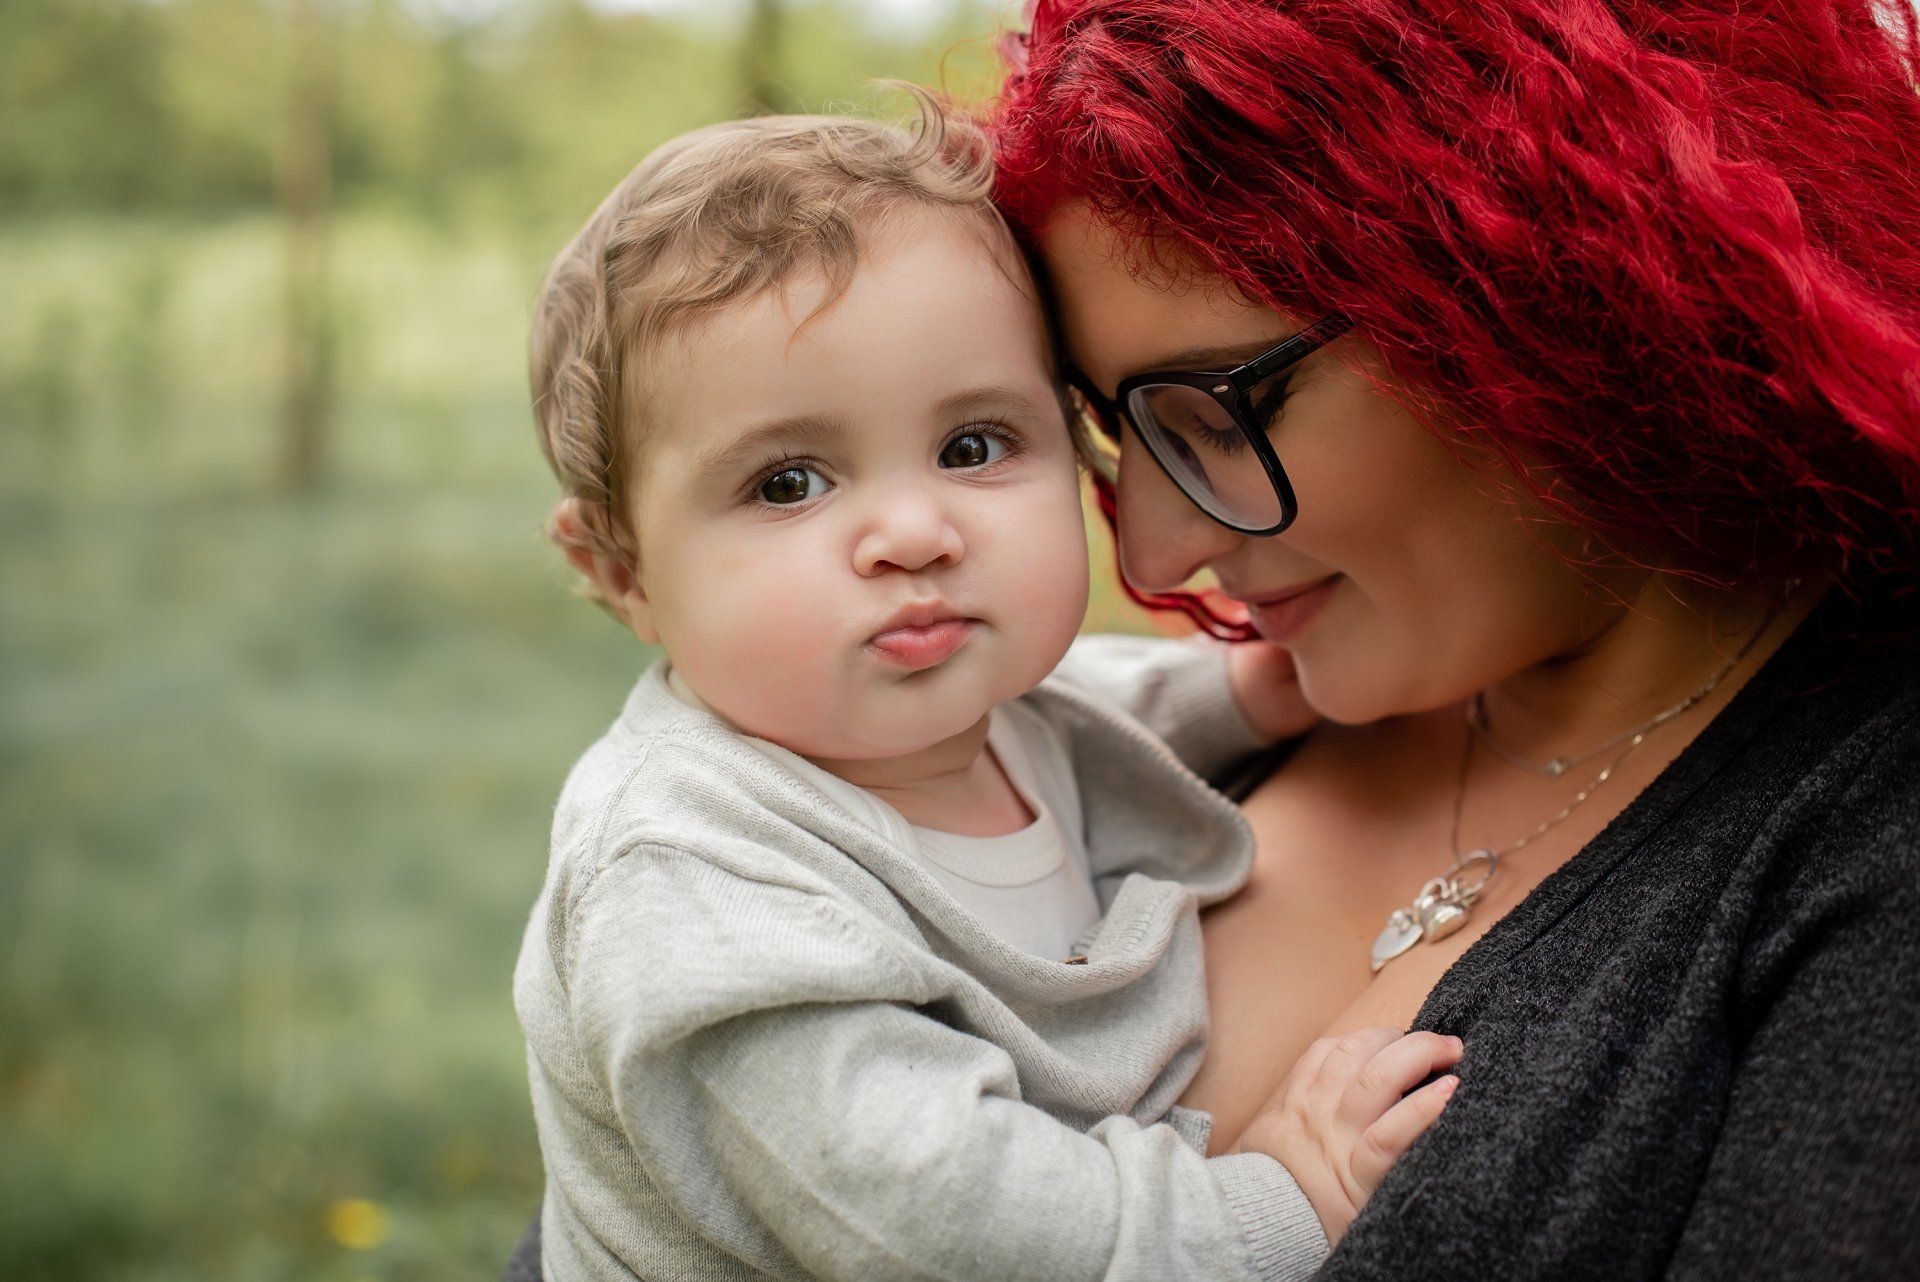 Family photographer Toronto | Stacey Naglie | Woman holding baby